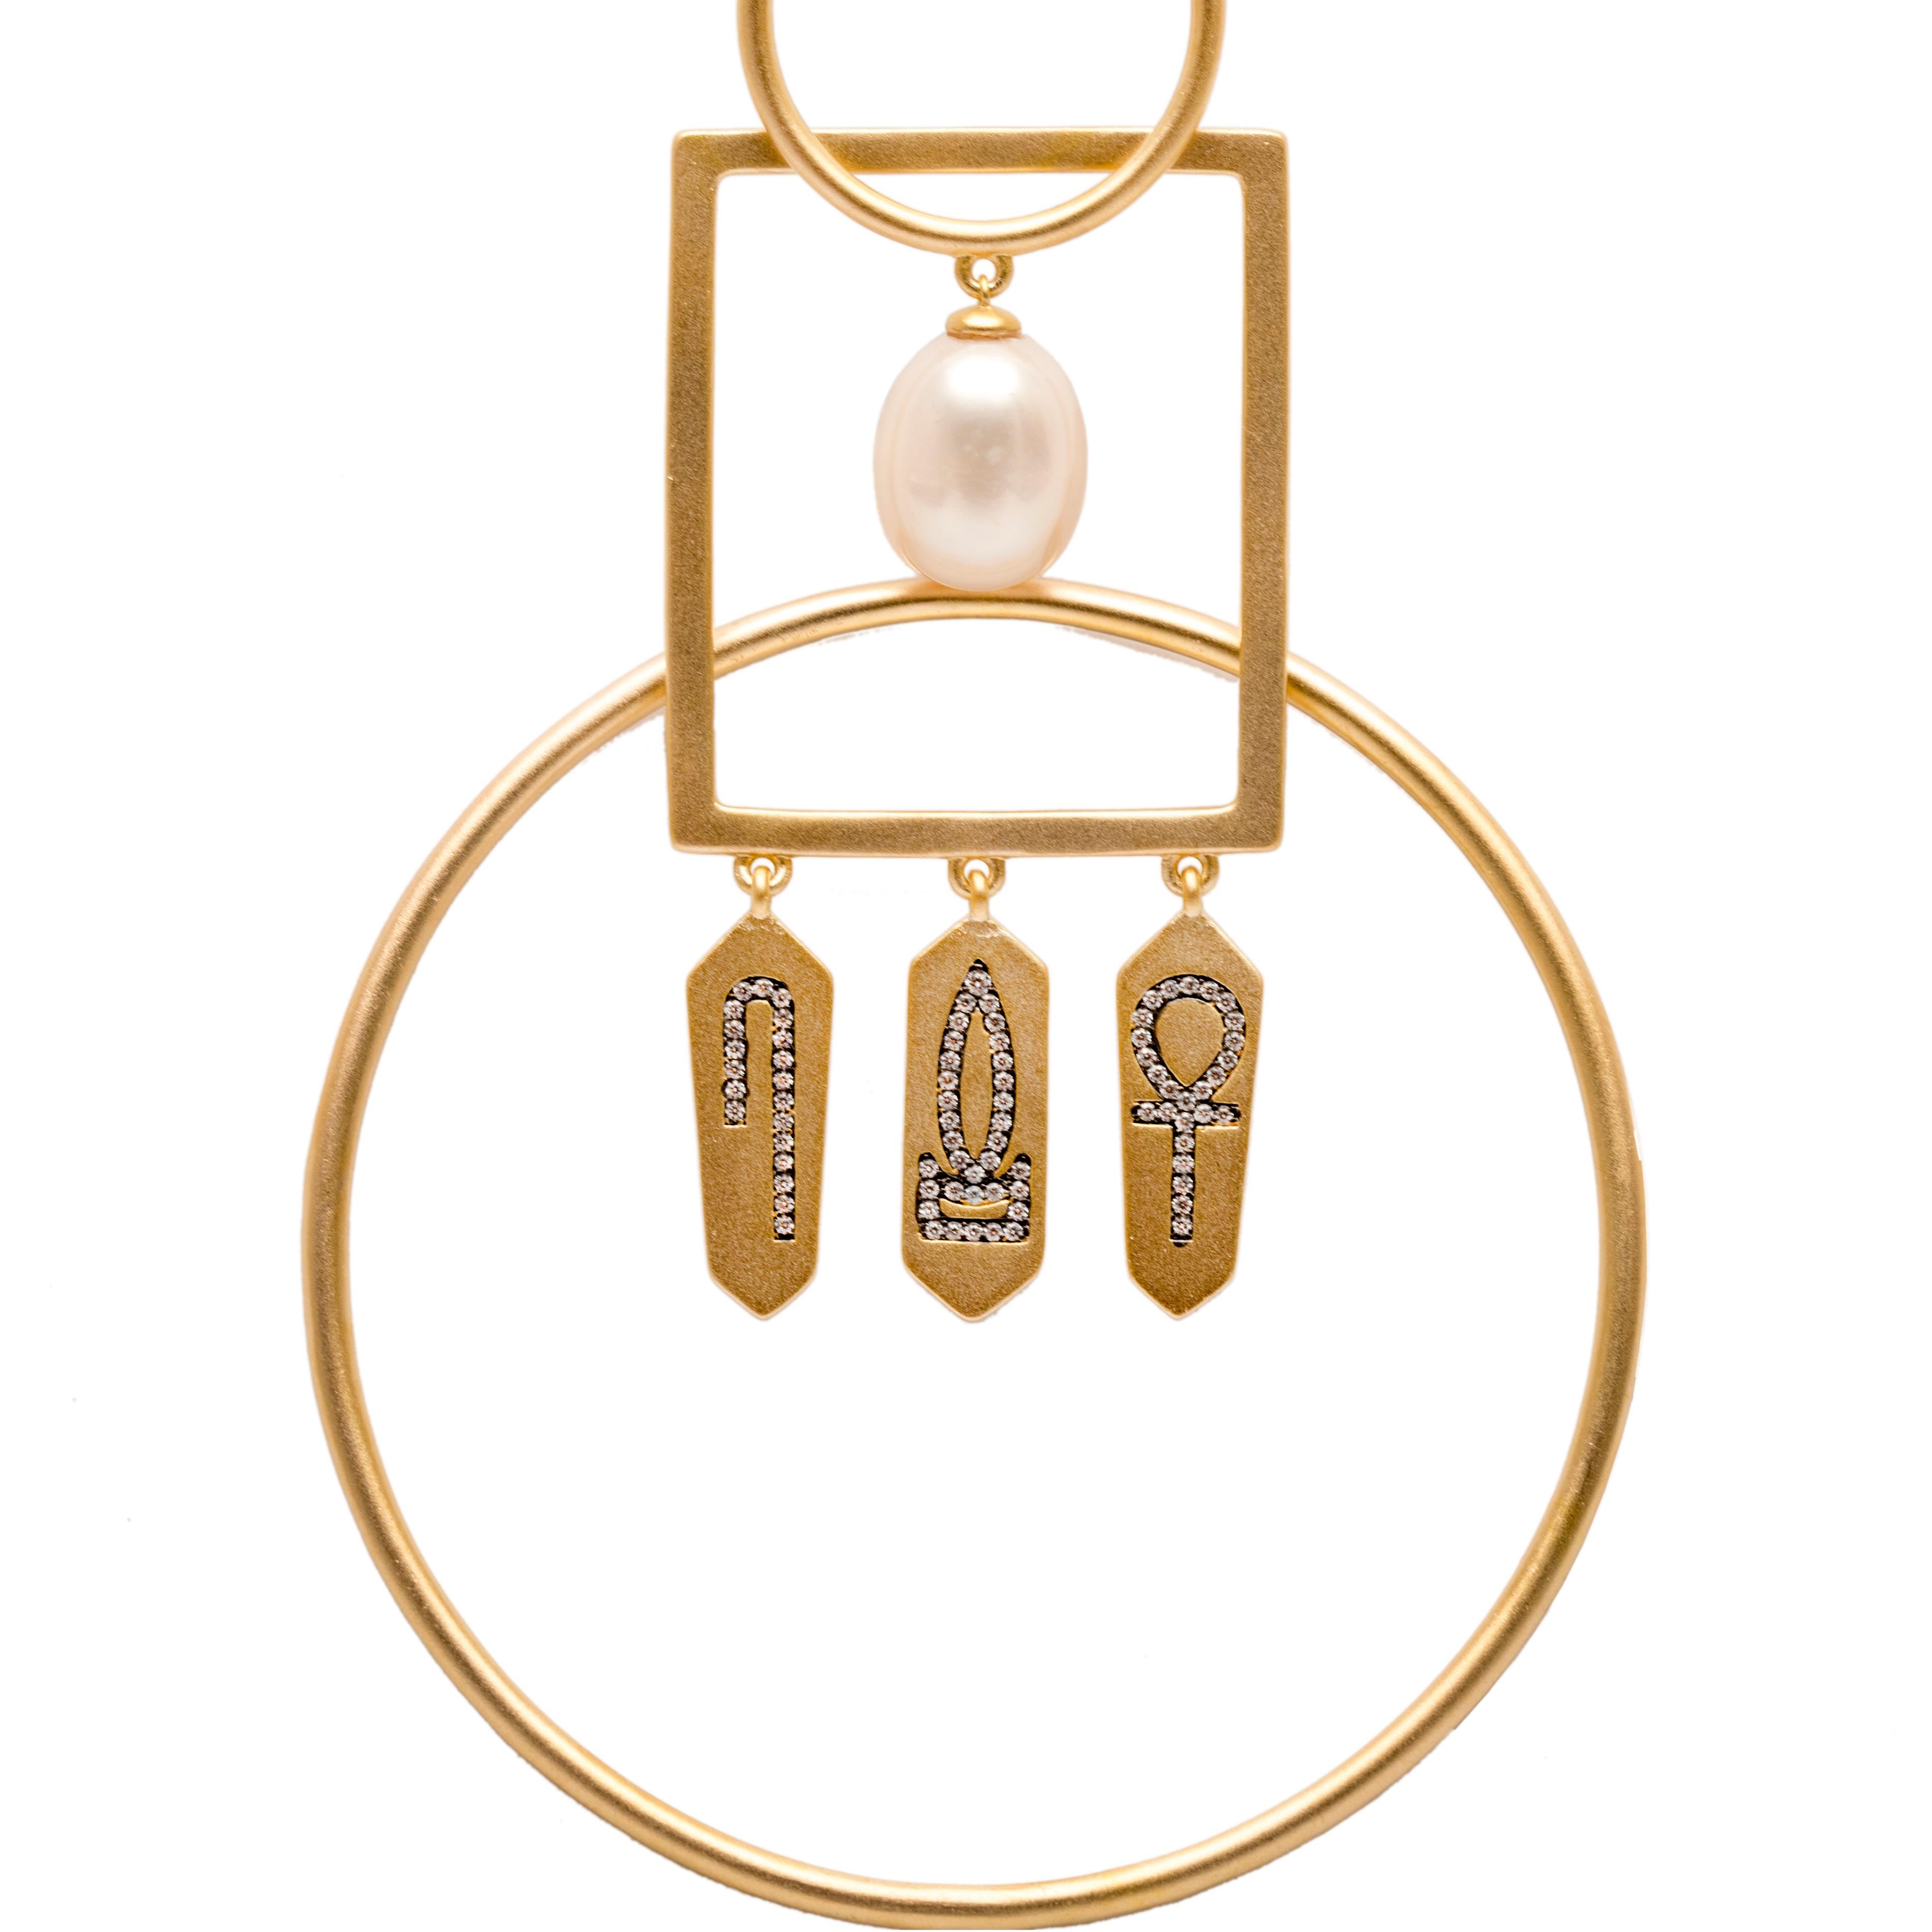 Newest Addition to Ammanii's Malikat = Queens Collections. Inscribed with hieroglyphic signs to give you the power of life, health and prosperity. Hand crafted, interconnected hoop earrings - vermeil gold adorned with green Chrysoprase or blue lapis